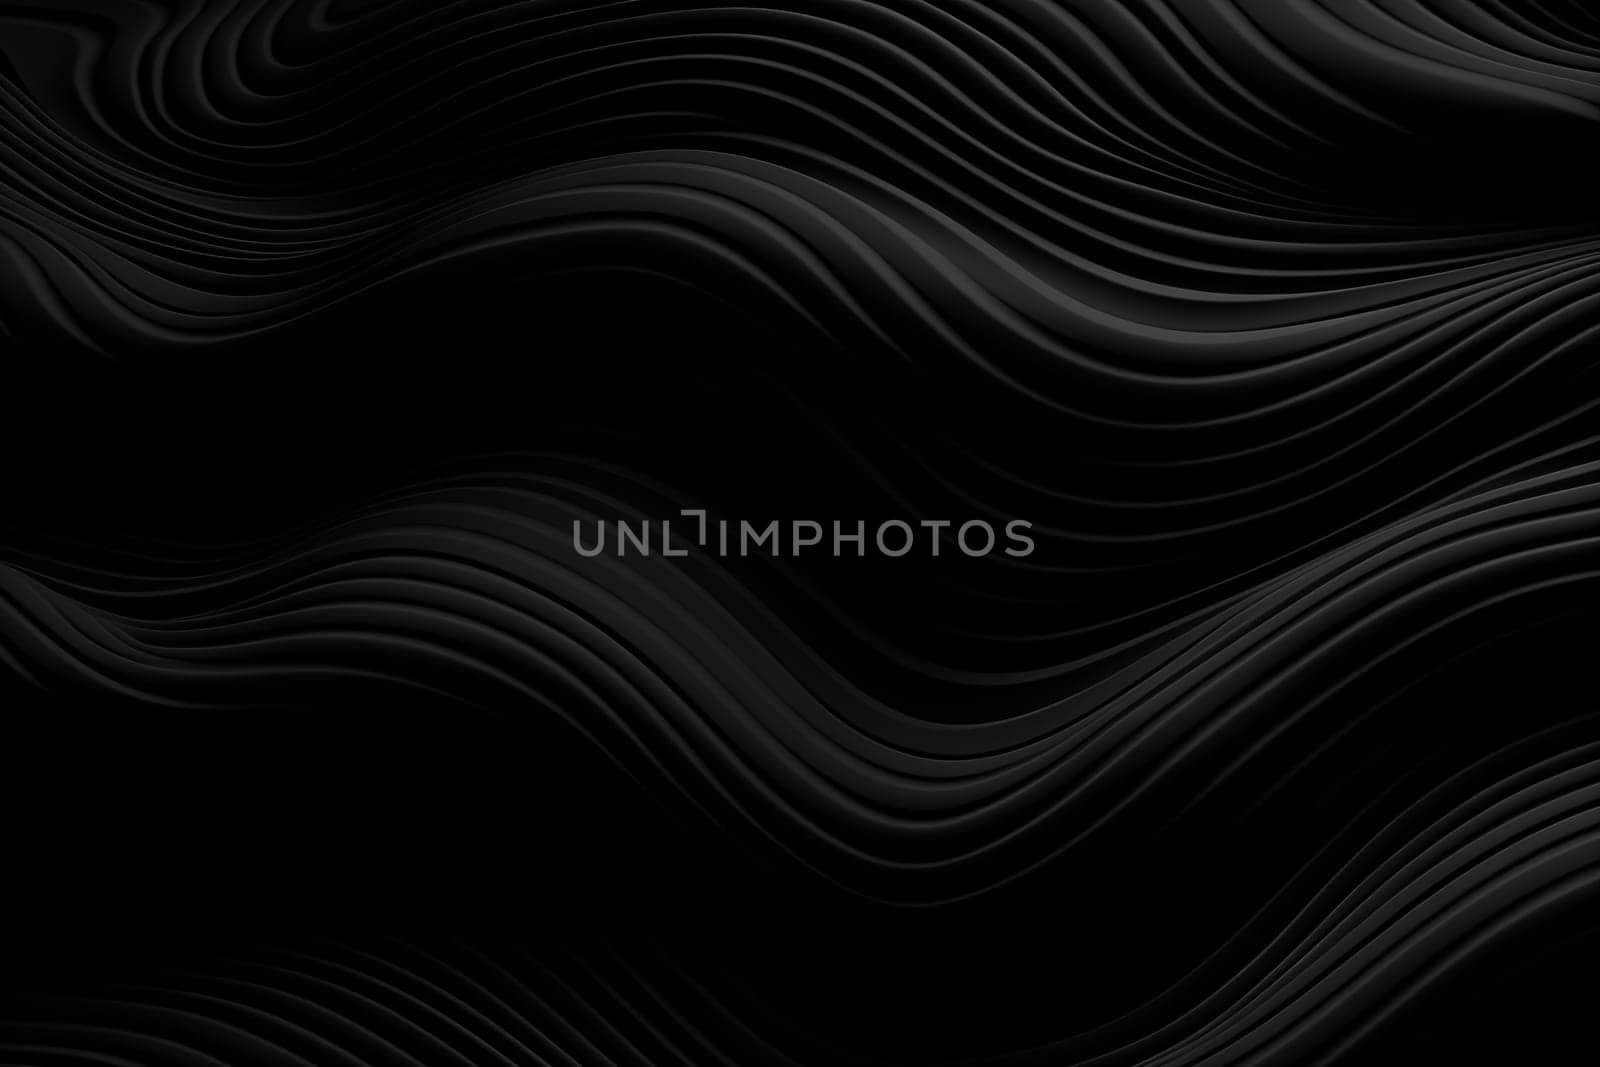 A black background with a pattern of curved black lines by Nadtochiy